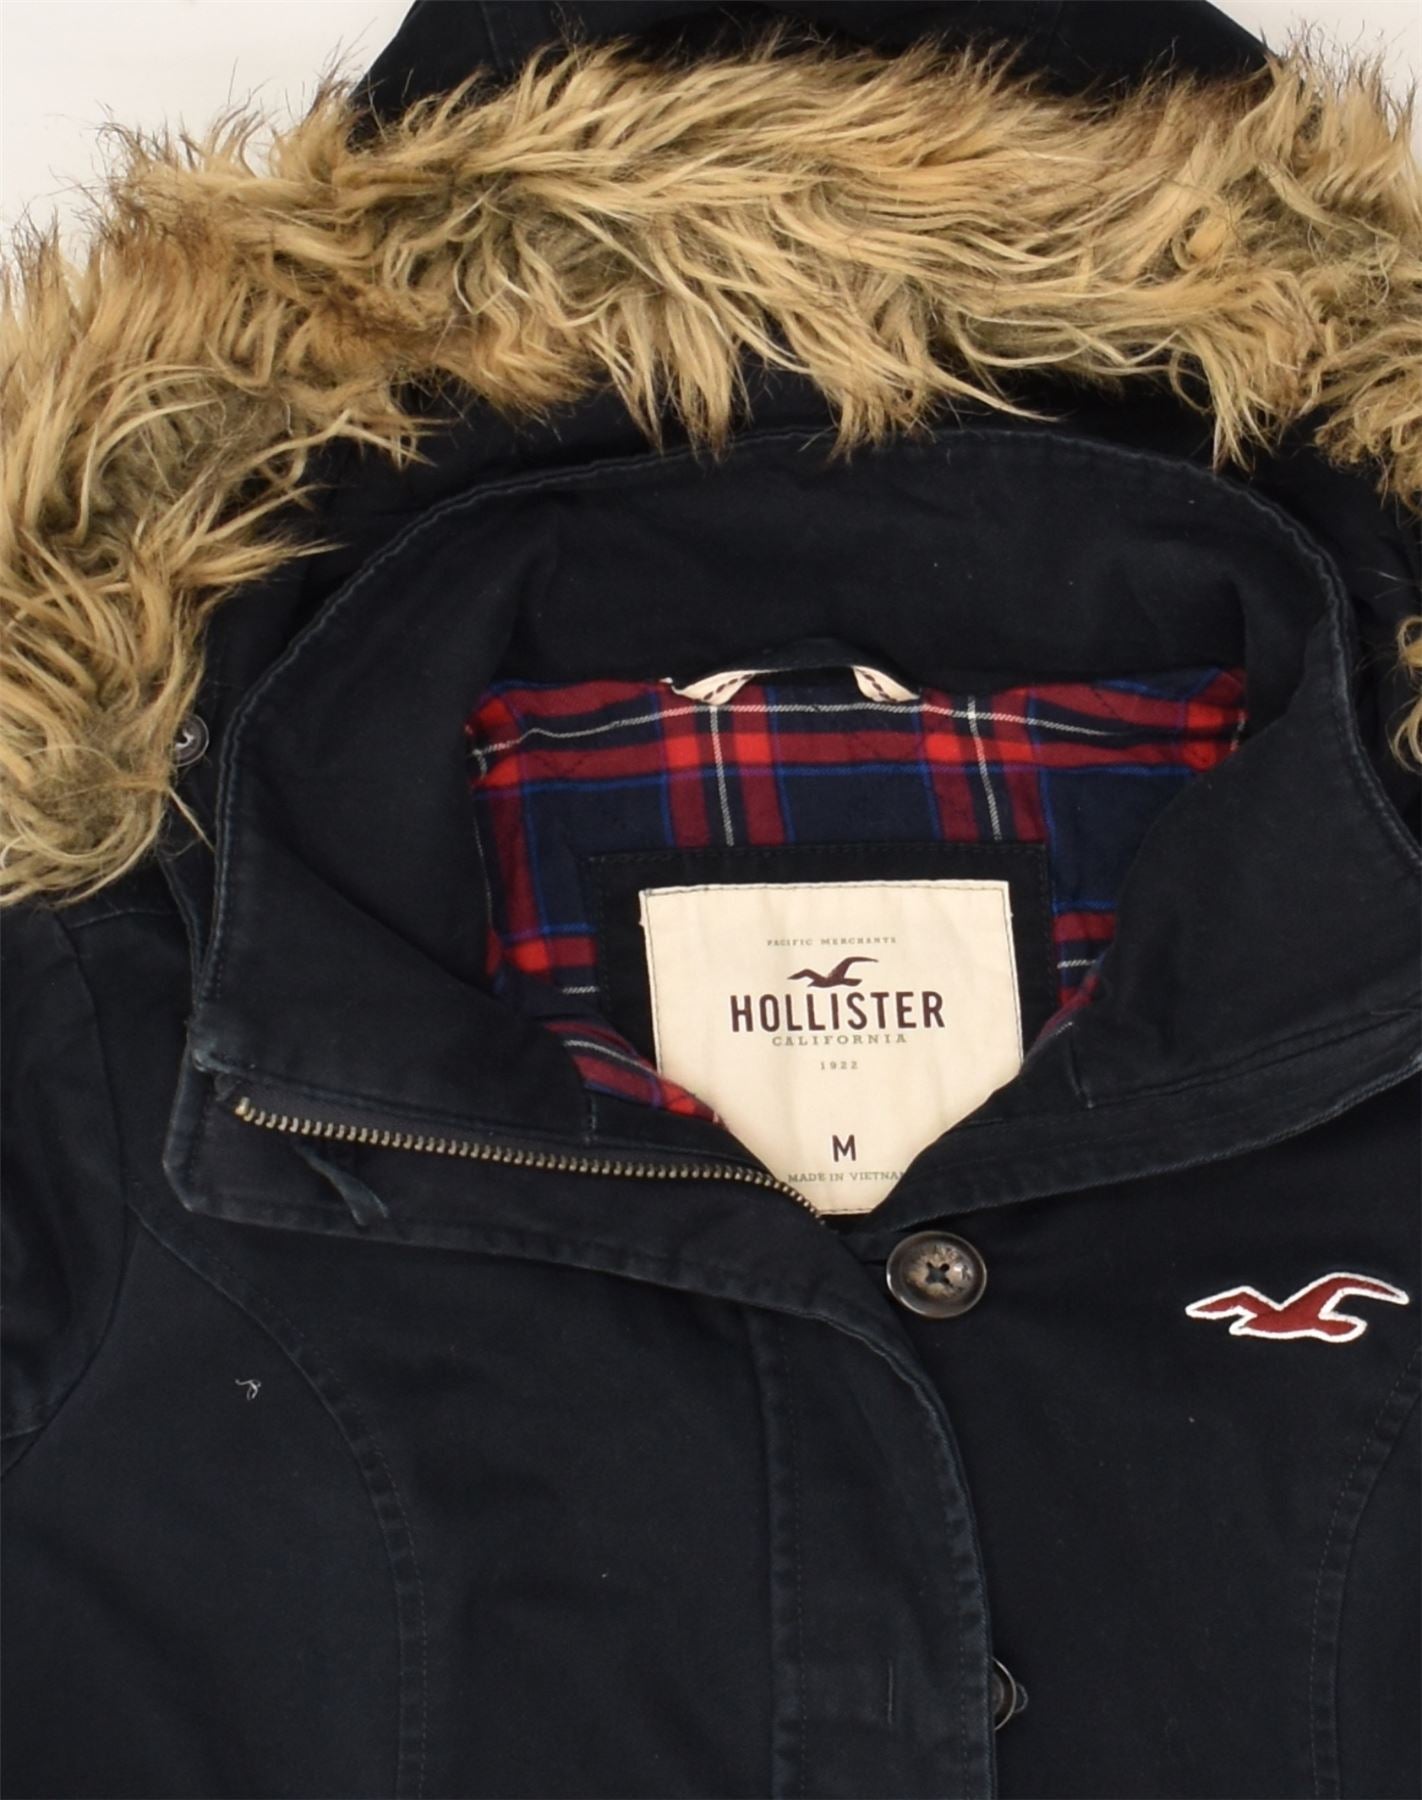 Buy Hollister Women's All Weather Jacket Outerwear Online at